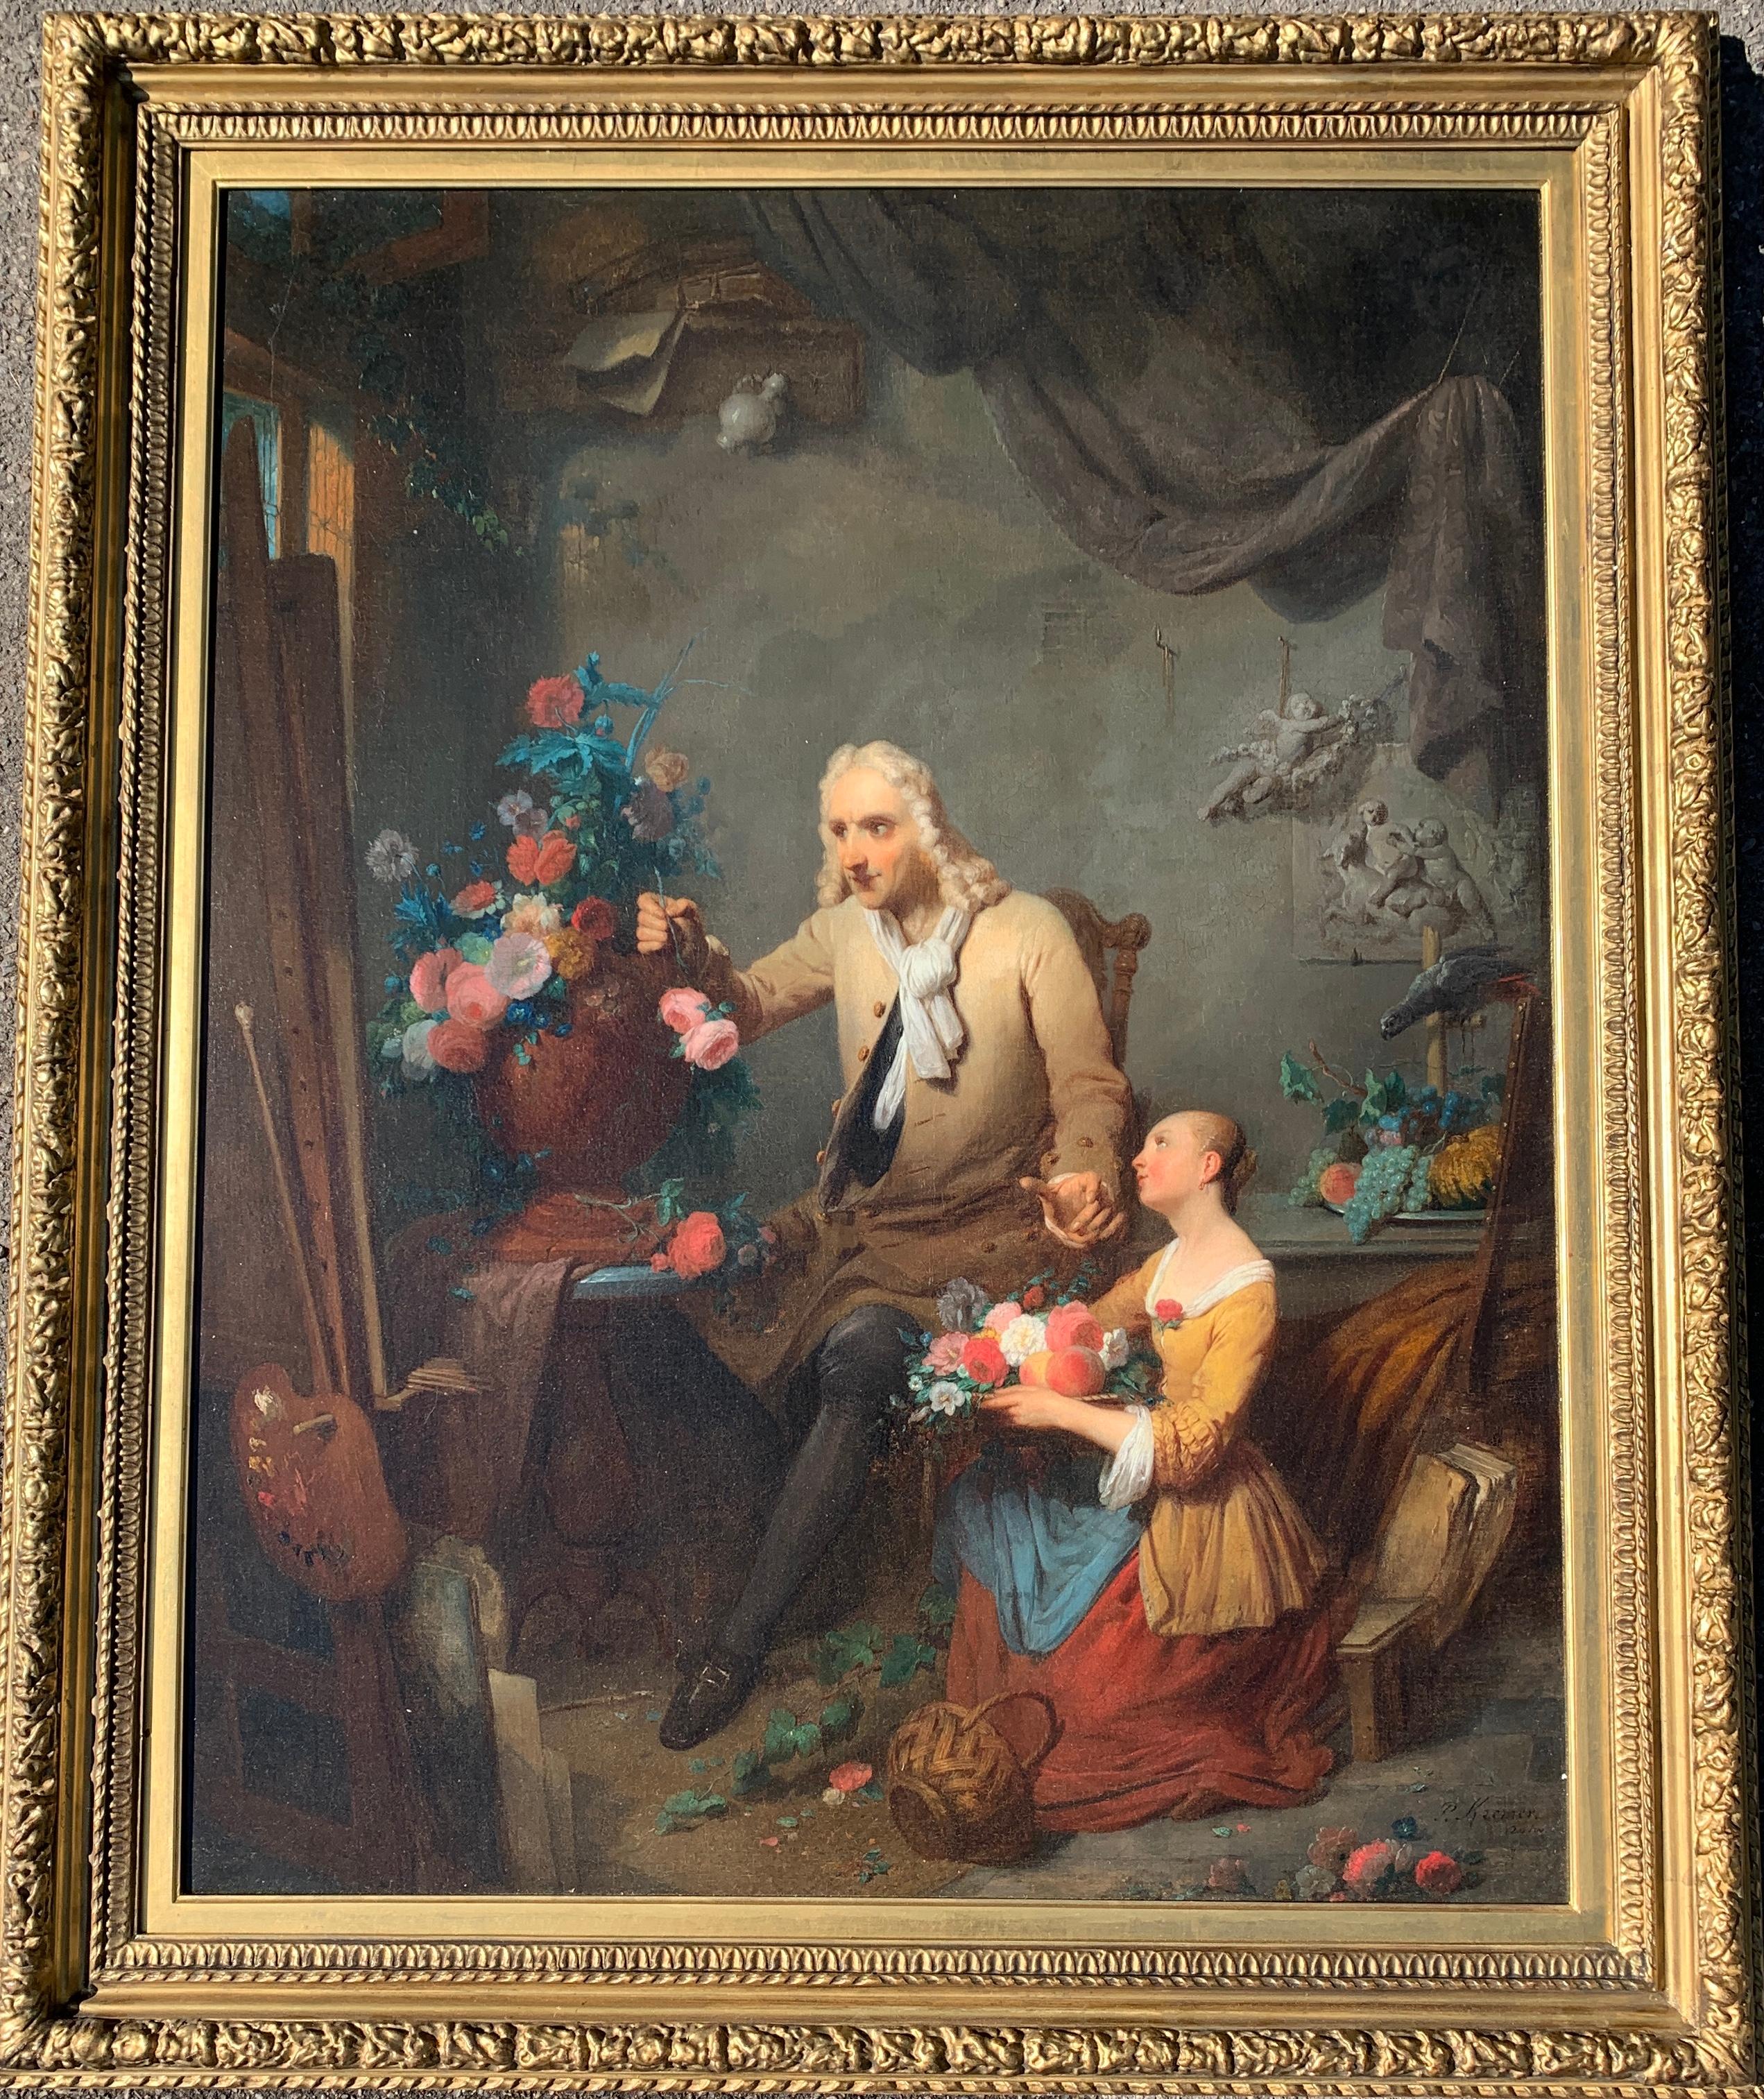 Petrus Kremer Figurative Painting - Dutch antique Portrait of an Artist in his studio with a young girl, flowers 